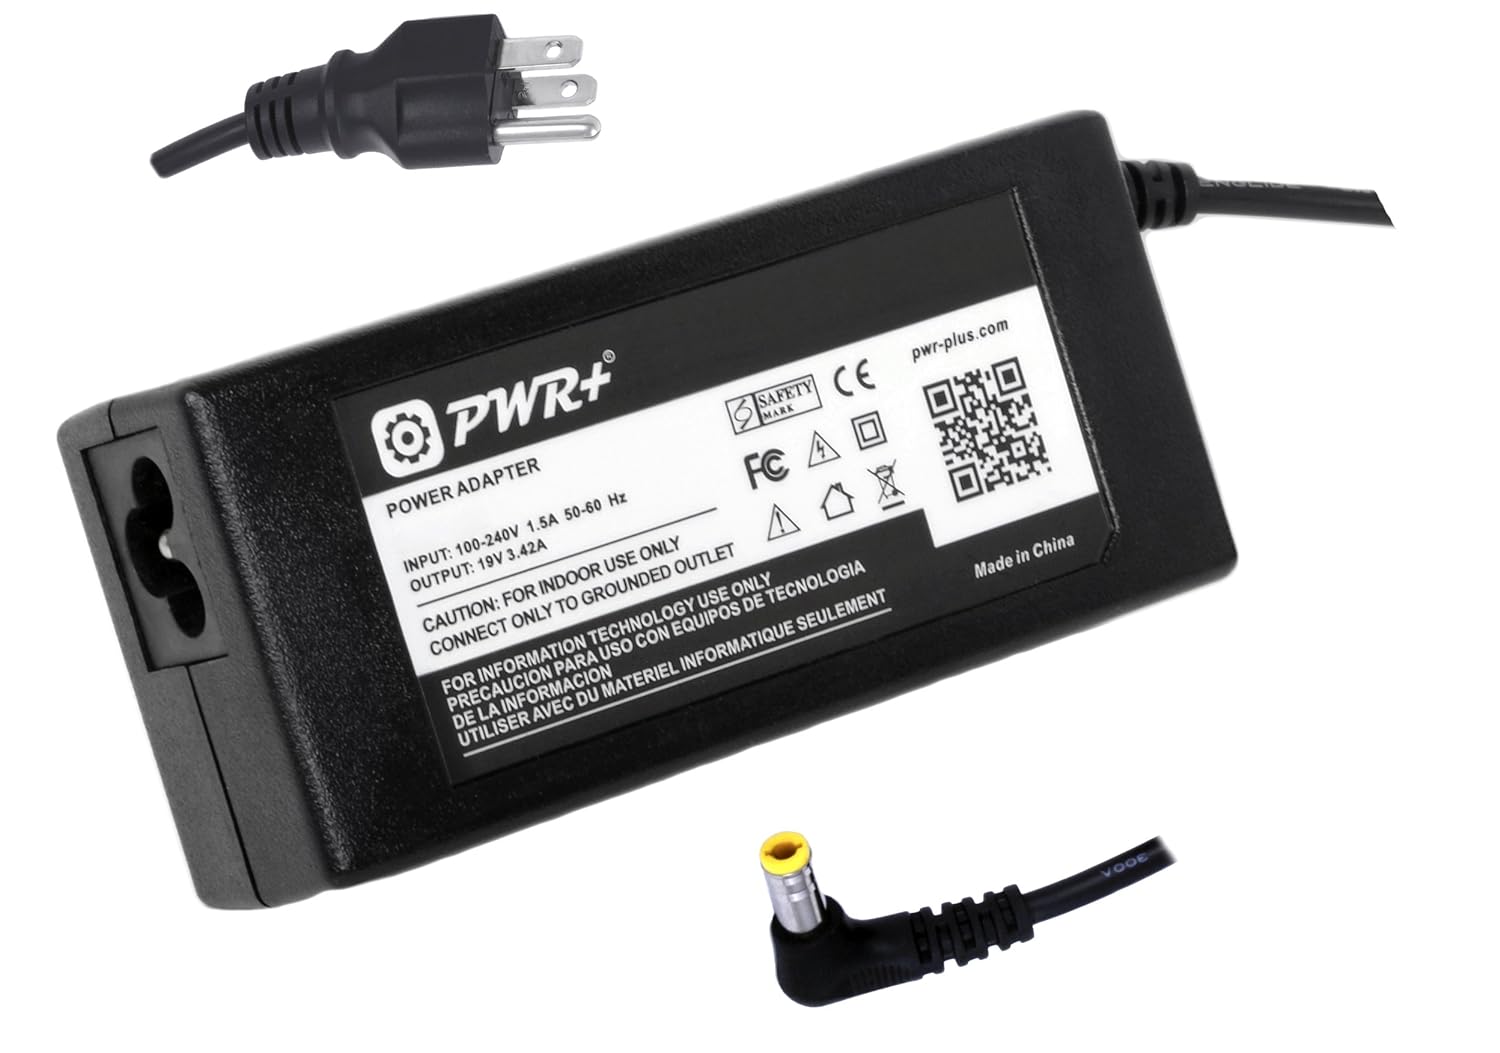 Kara Mobile Ac Adapter for Acer Aspire 1551 As1551-4755 ; 5252 As5252-v476 As5552-3104 ; 5741 As5741z-5539 ; 5742 As5742-7120 As5742-7653